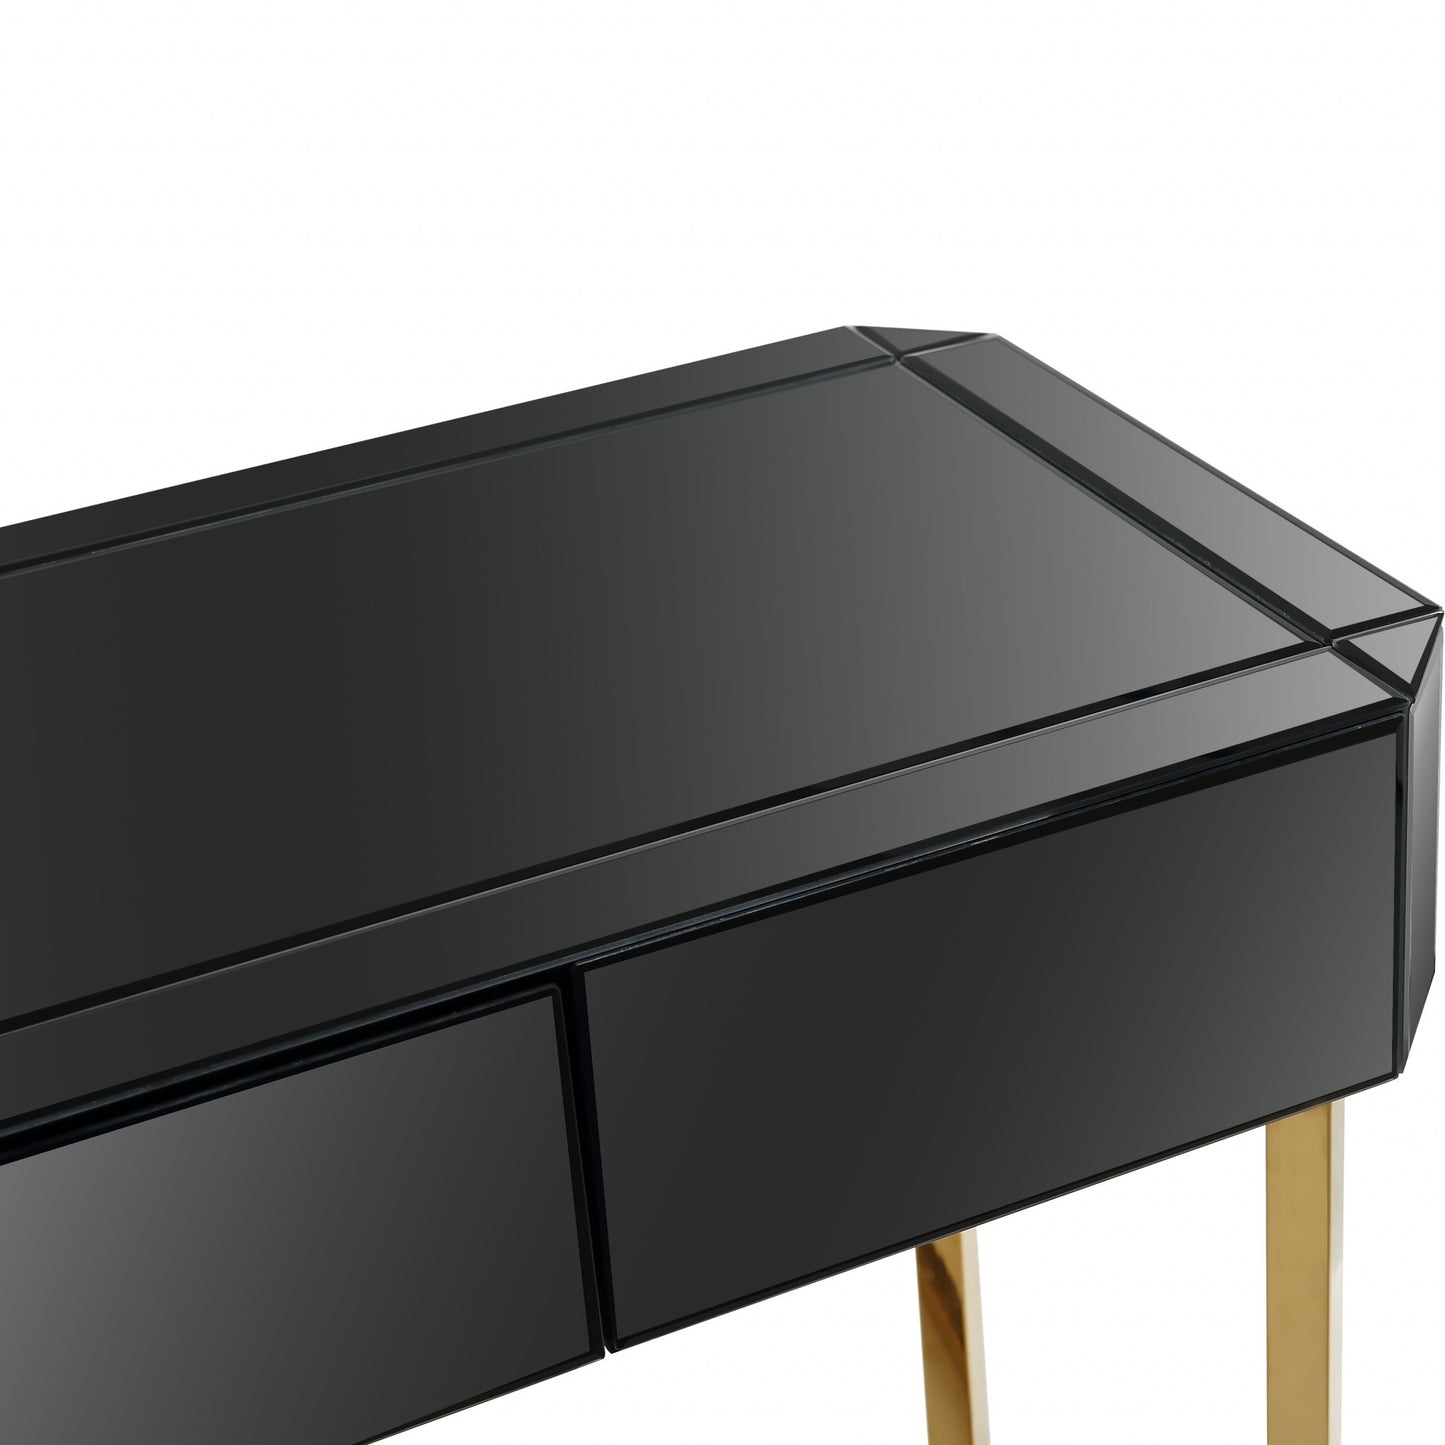 Black and Gold Console Table By Homeroots